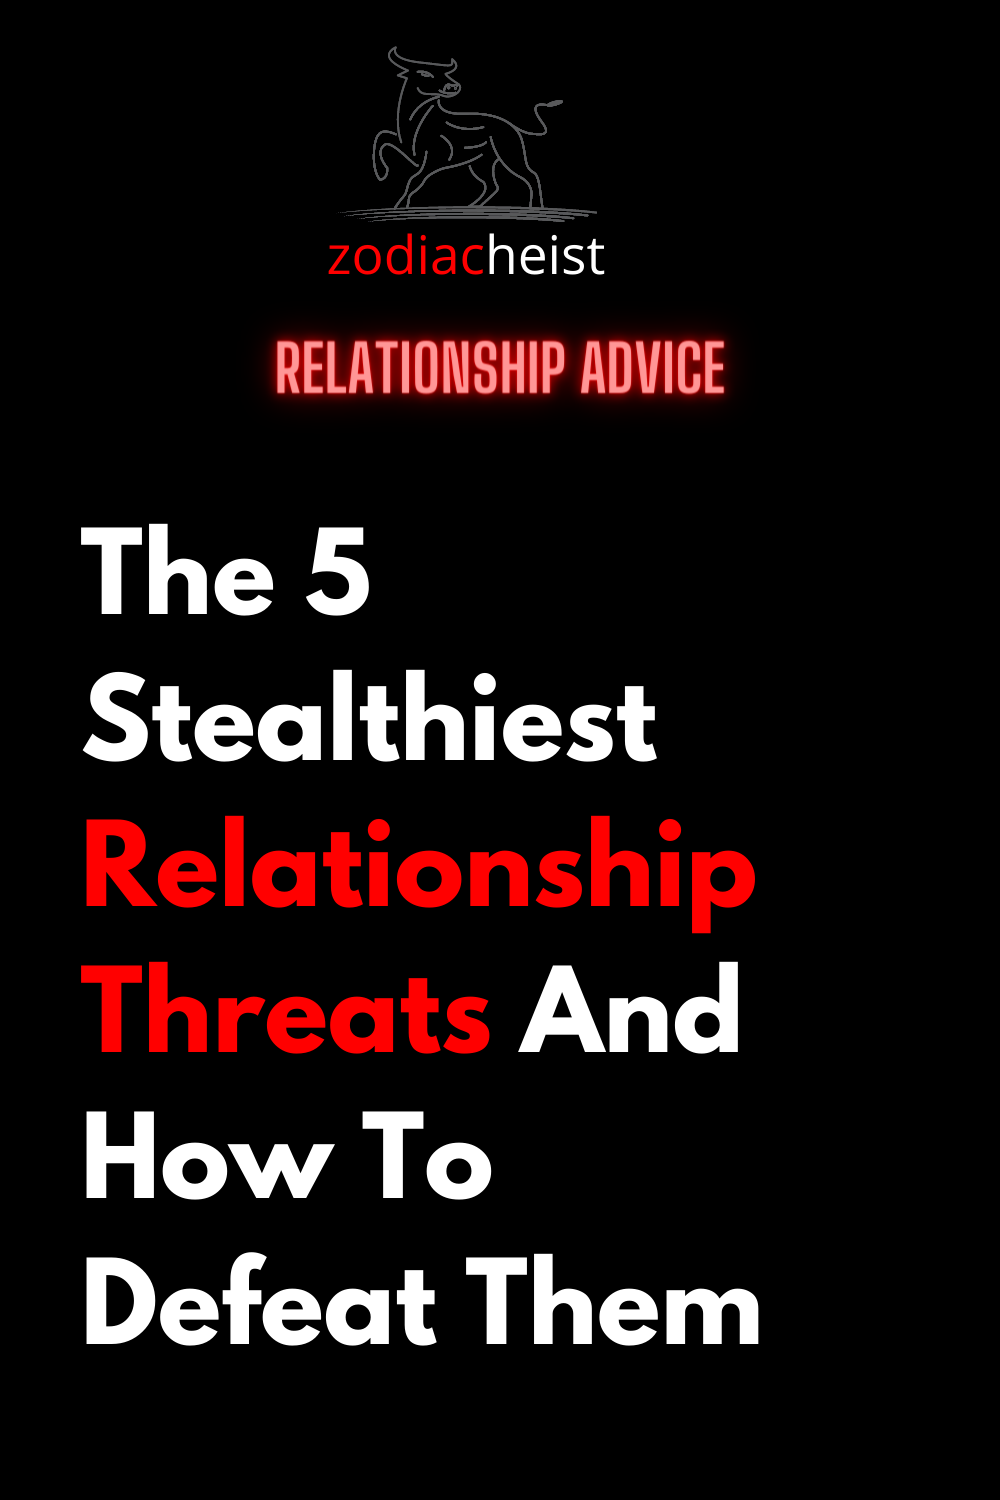 The 5 Stealthiest Relationship Threats And How To Defeat Them